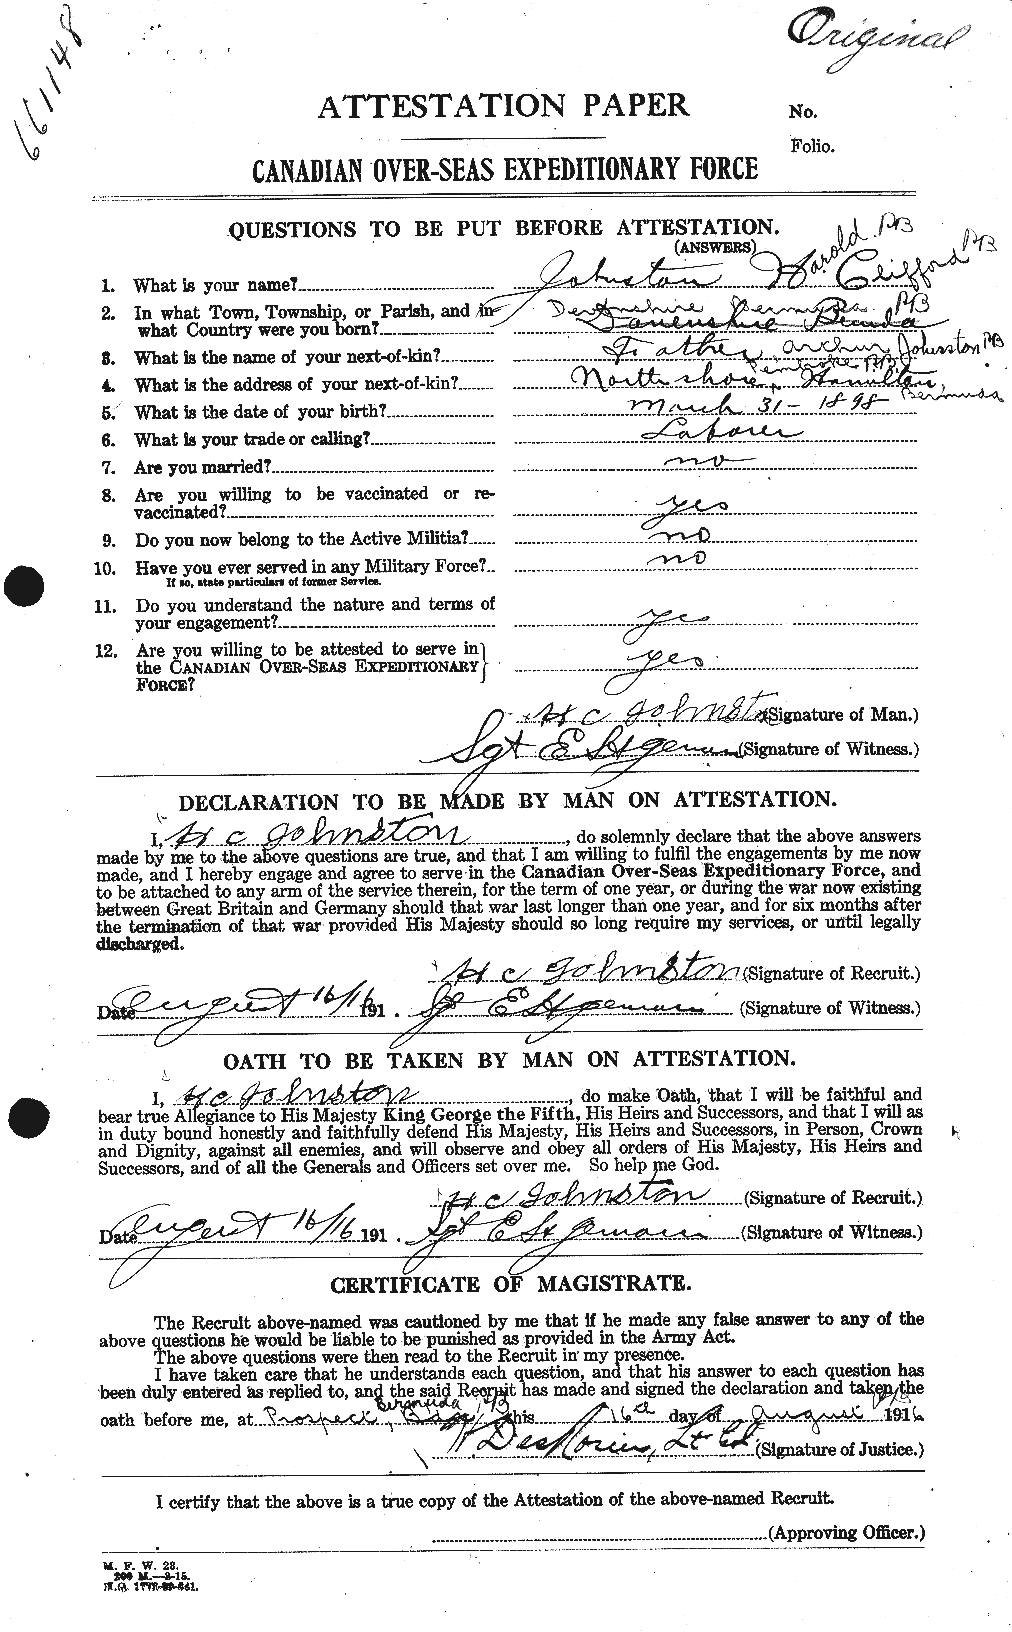 Personnel Records of the First World War - CEF 419486a